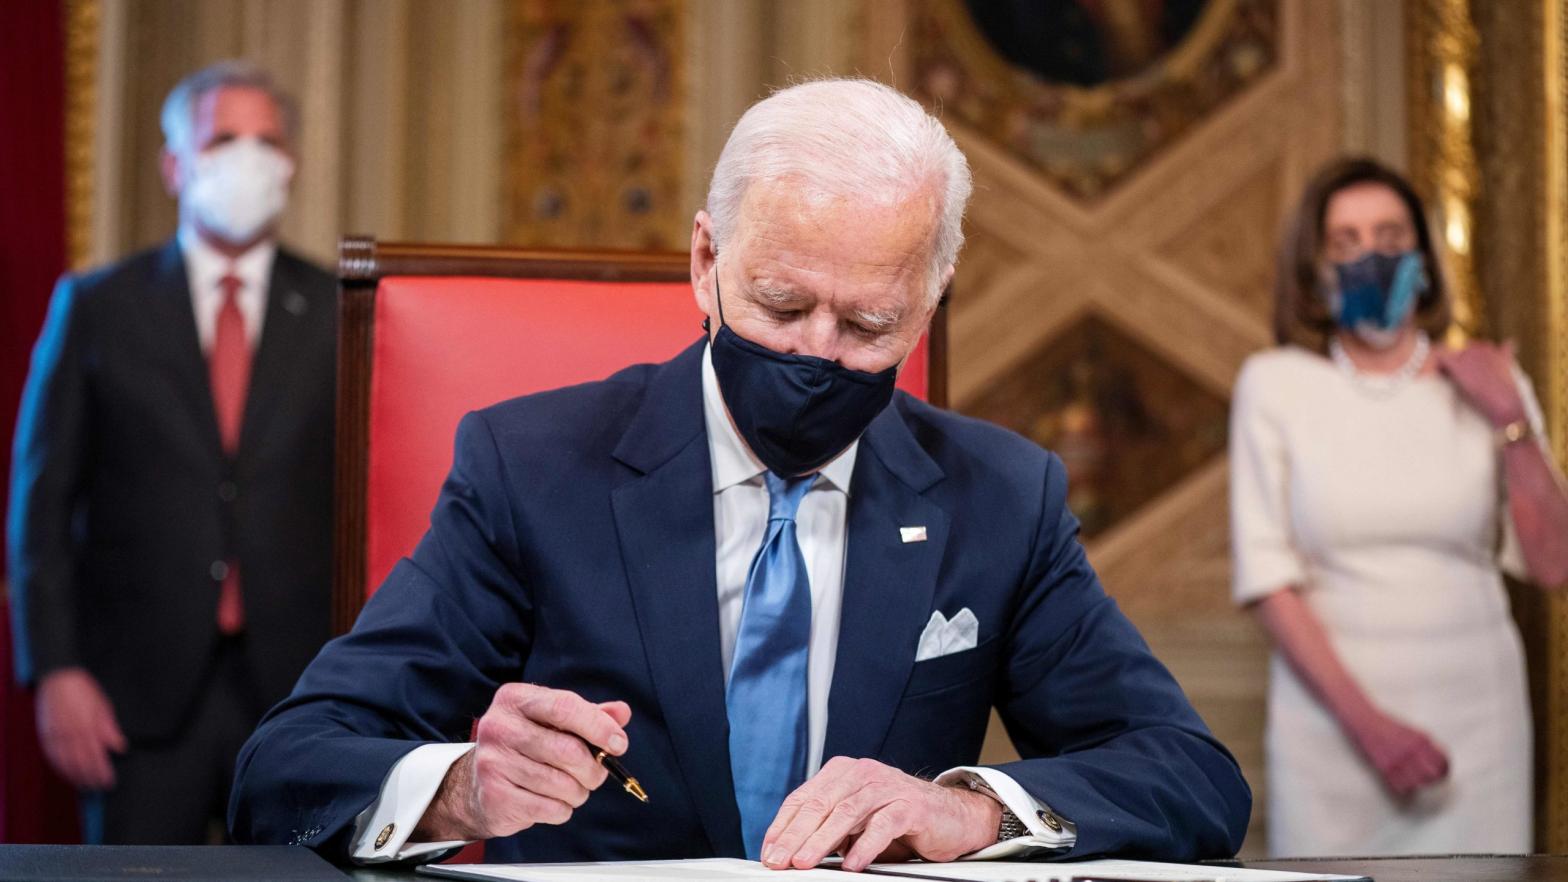 Joe Biden up the nation's Paris Agreement commitments challenge. (Photo: Jim Lo Scalzo/Pool, Getty Images)